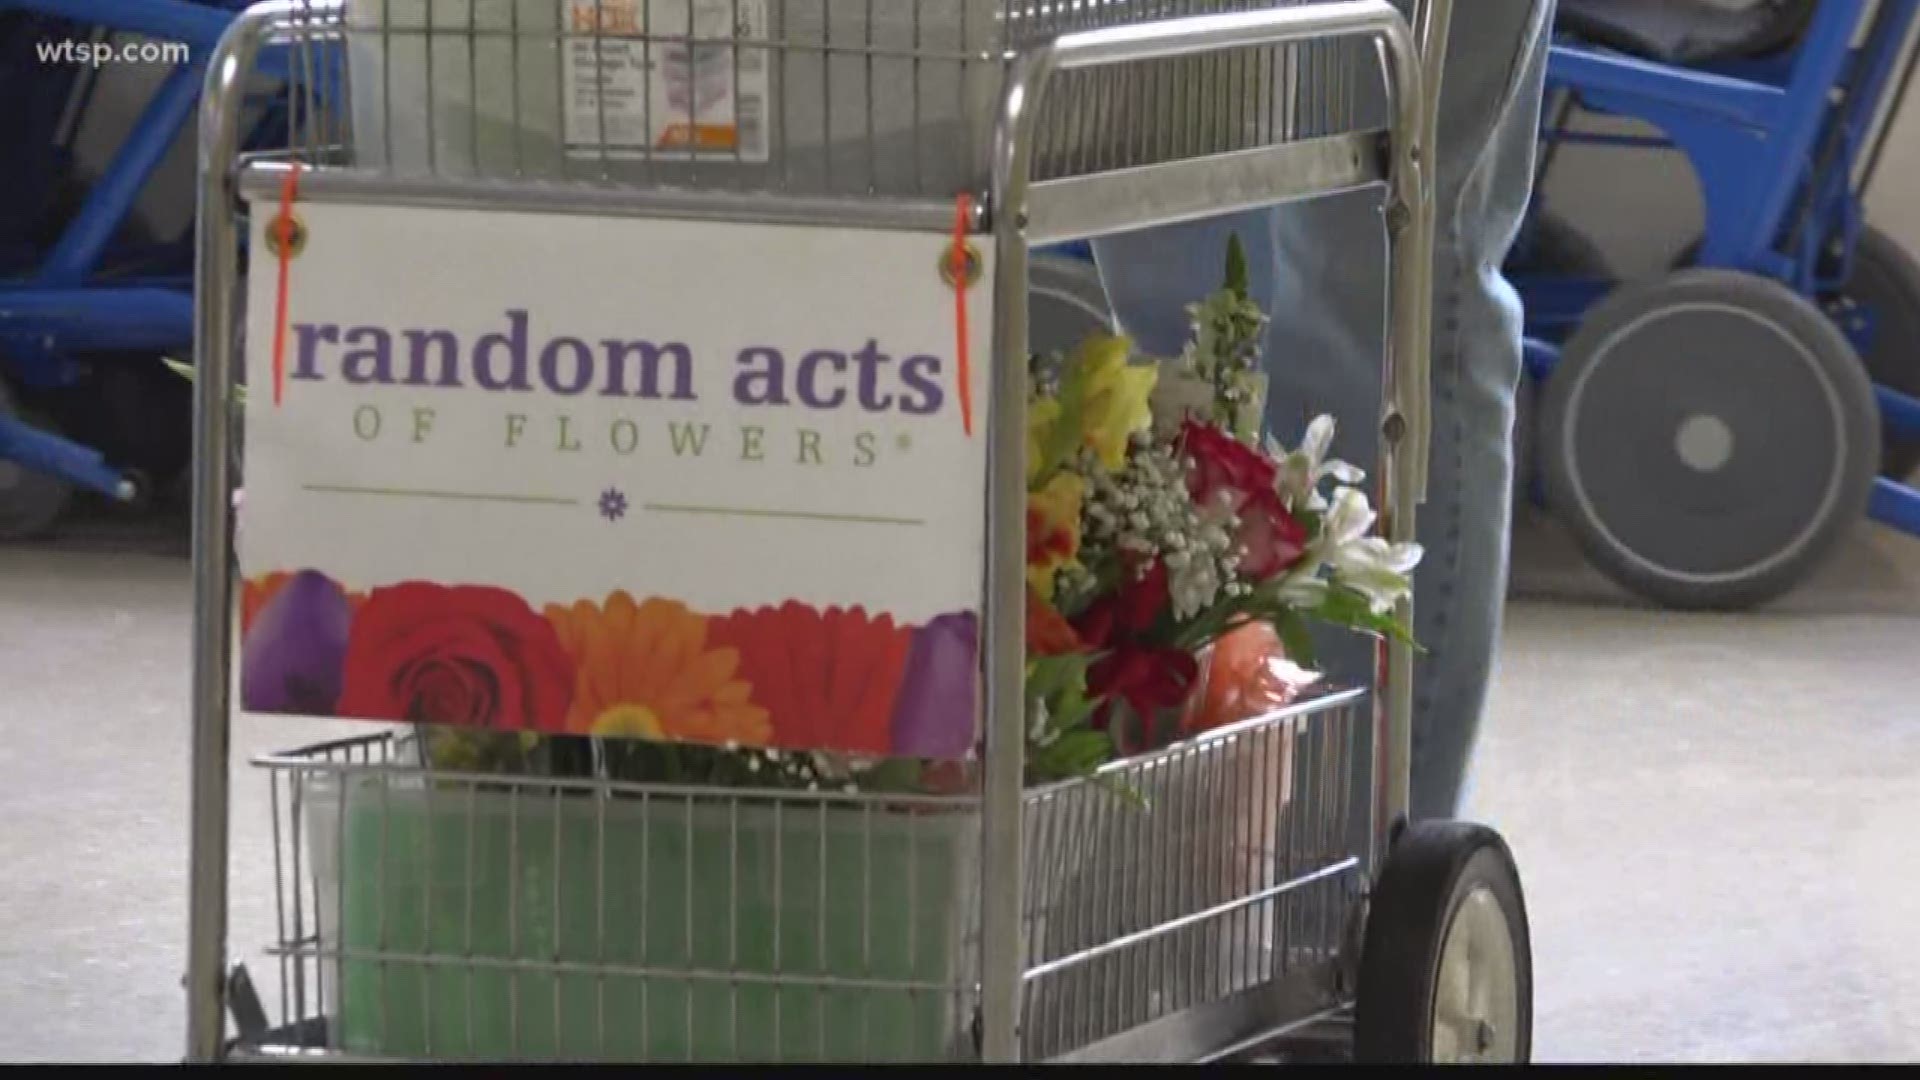 “Every day I come in, it’s a joy,” explained Monica Kok, the Director of Mission Fulfillment for the Tampa Bay chapter of Random Acts of Flowers.

The non-profit’s Tampa-area outreach has refurbished and delivered exactly 85,019 bouquets since 2013, according to its website. The big milestone on Thursday was the 7,500th vase directly given to a local veteran. https://on.wtsp.com/2P0SZlt